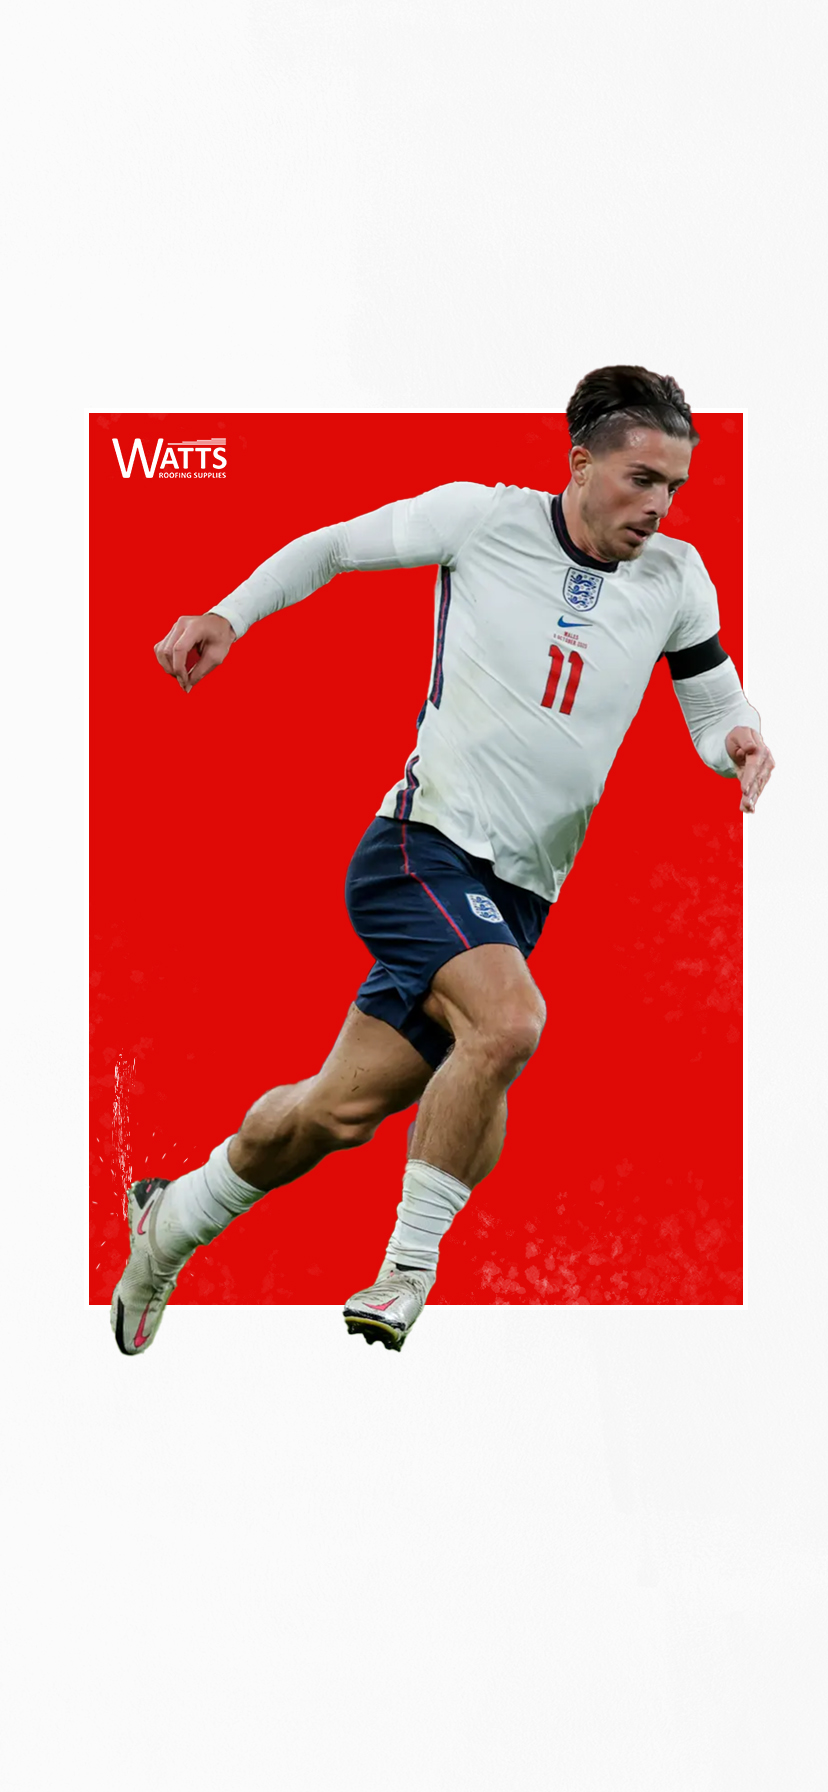 England Euro 2020 Wallpaper for Your Phone. Watts Roofing Supplies